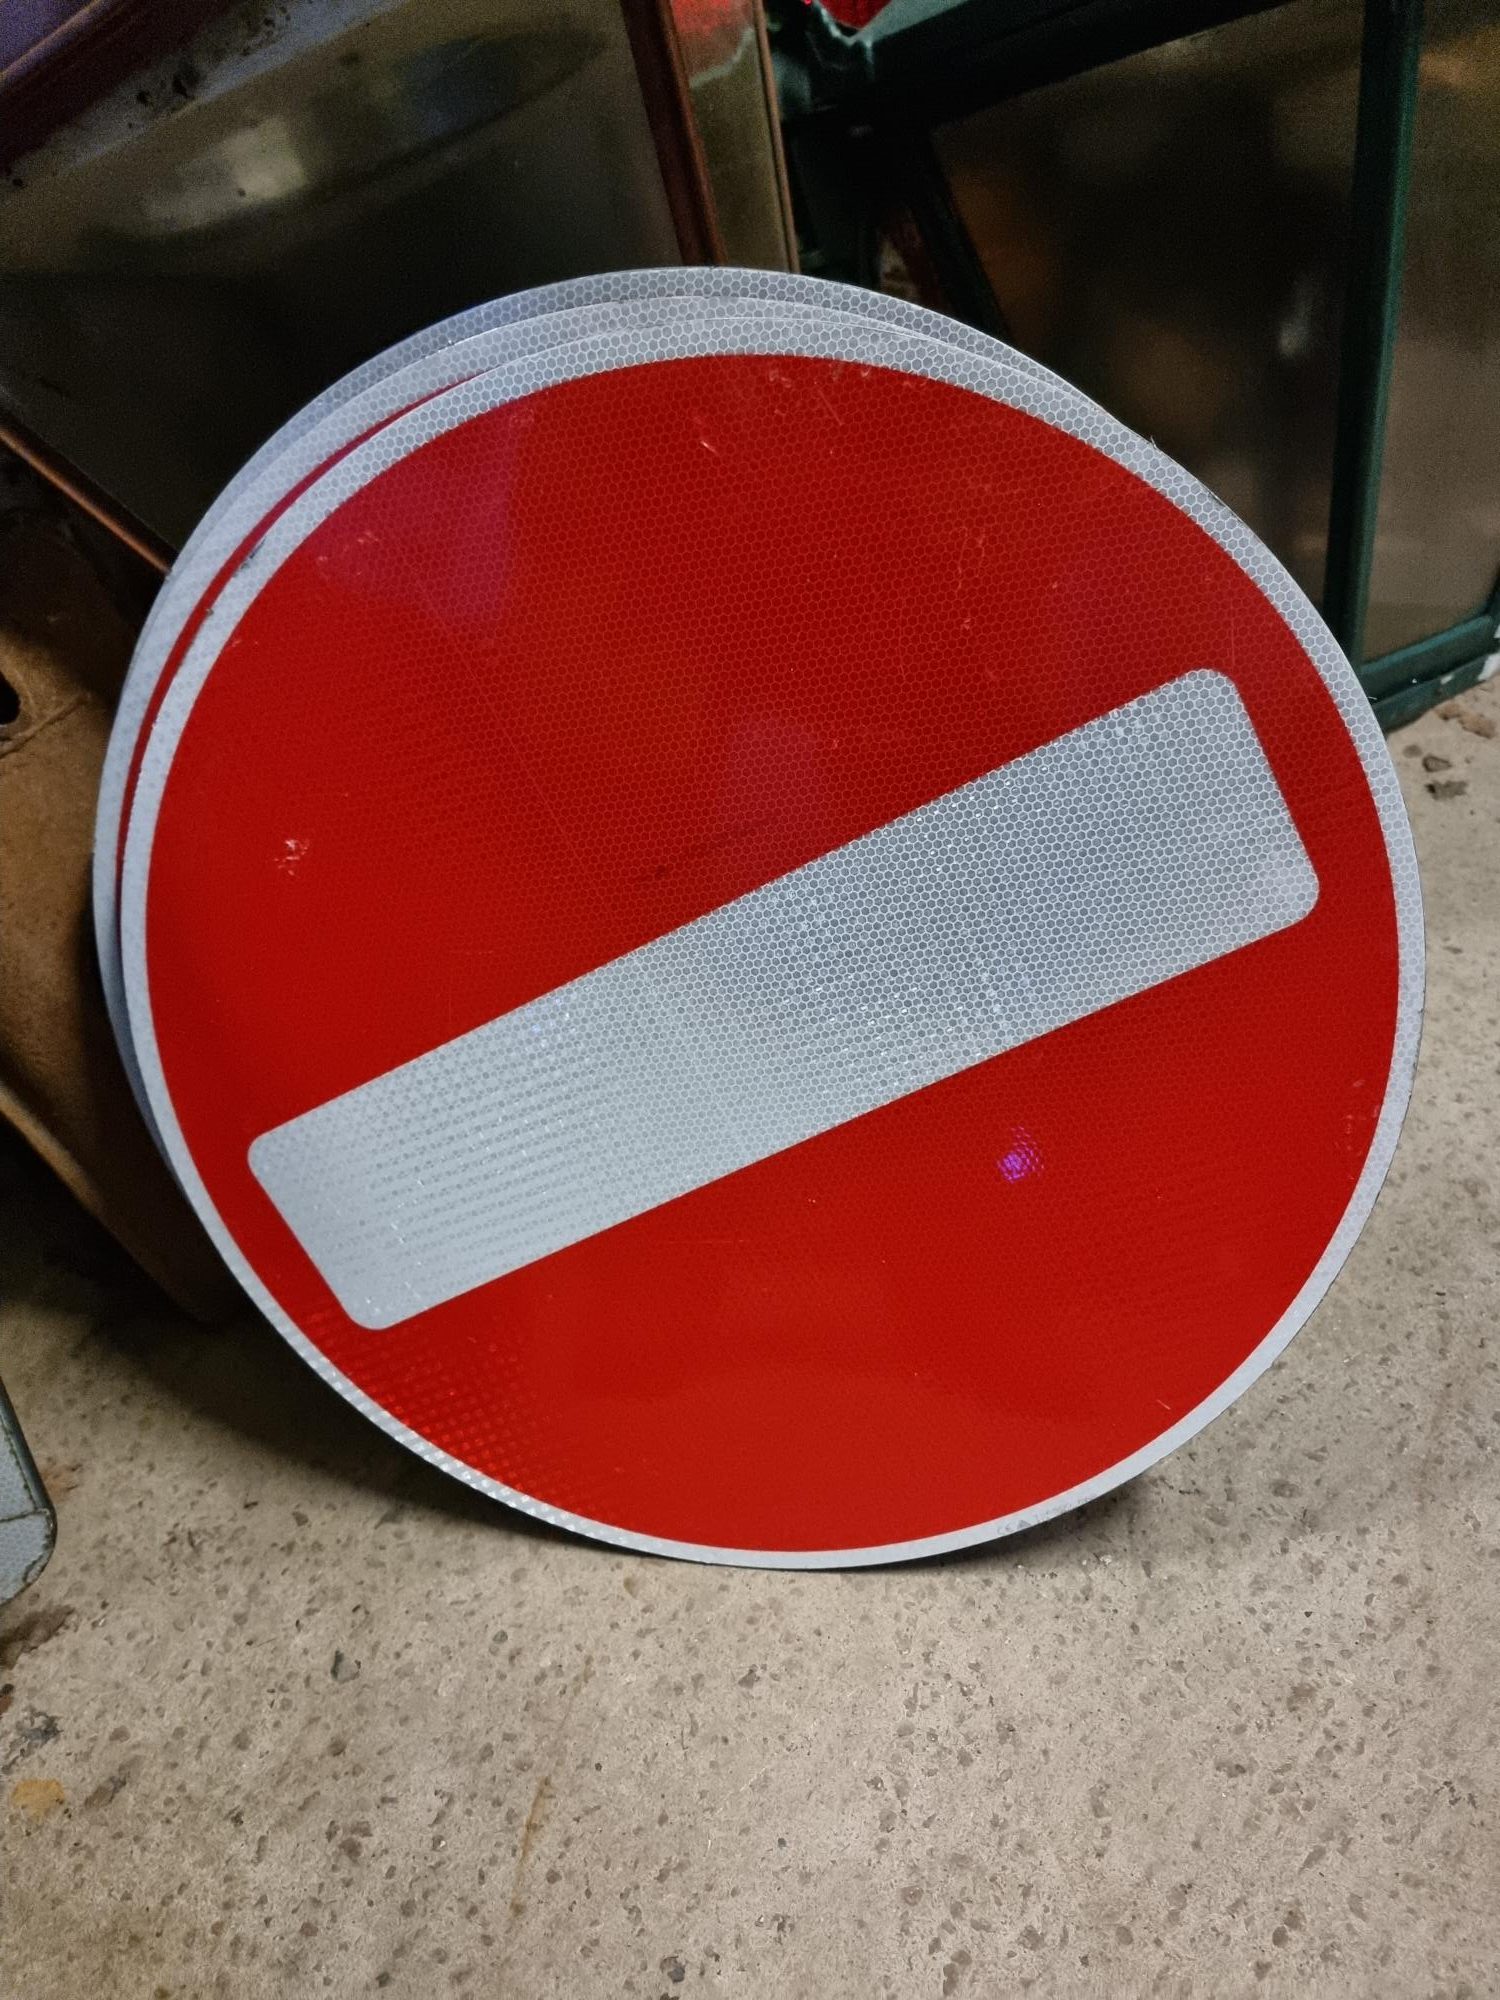 No Entry – Road and Traffic Signs